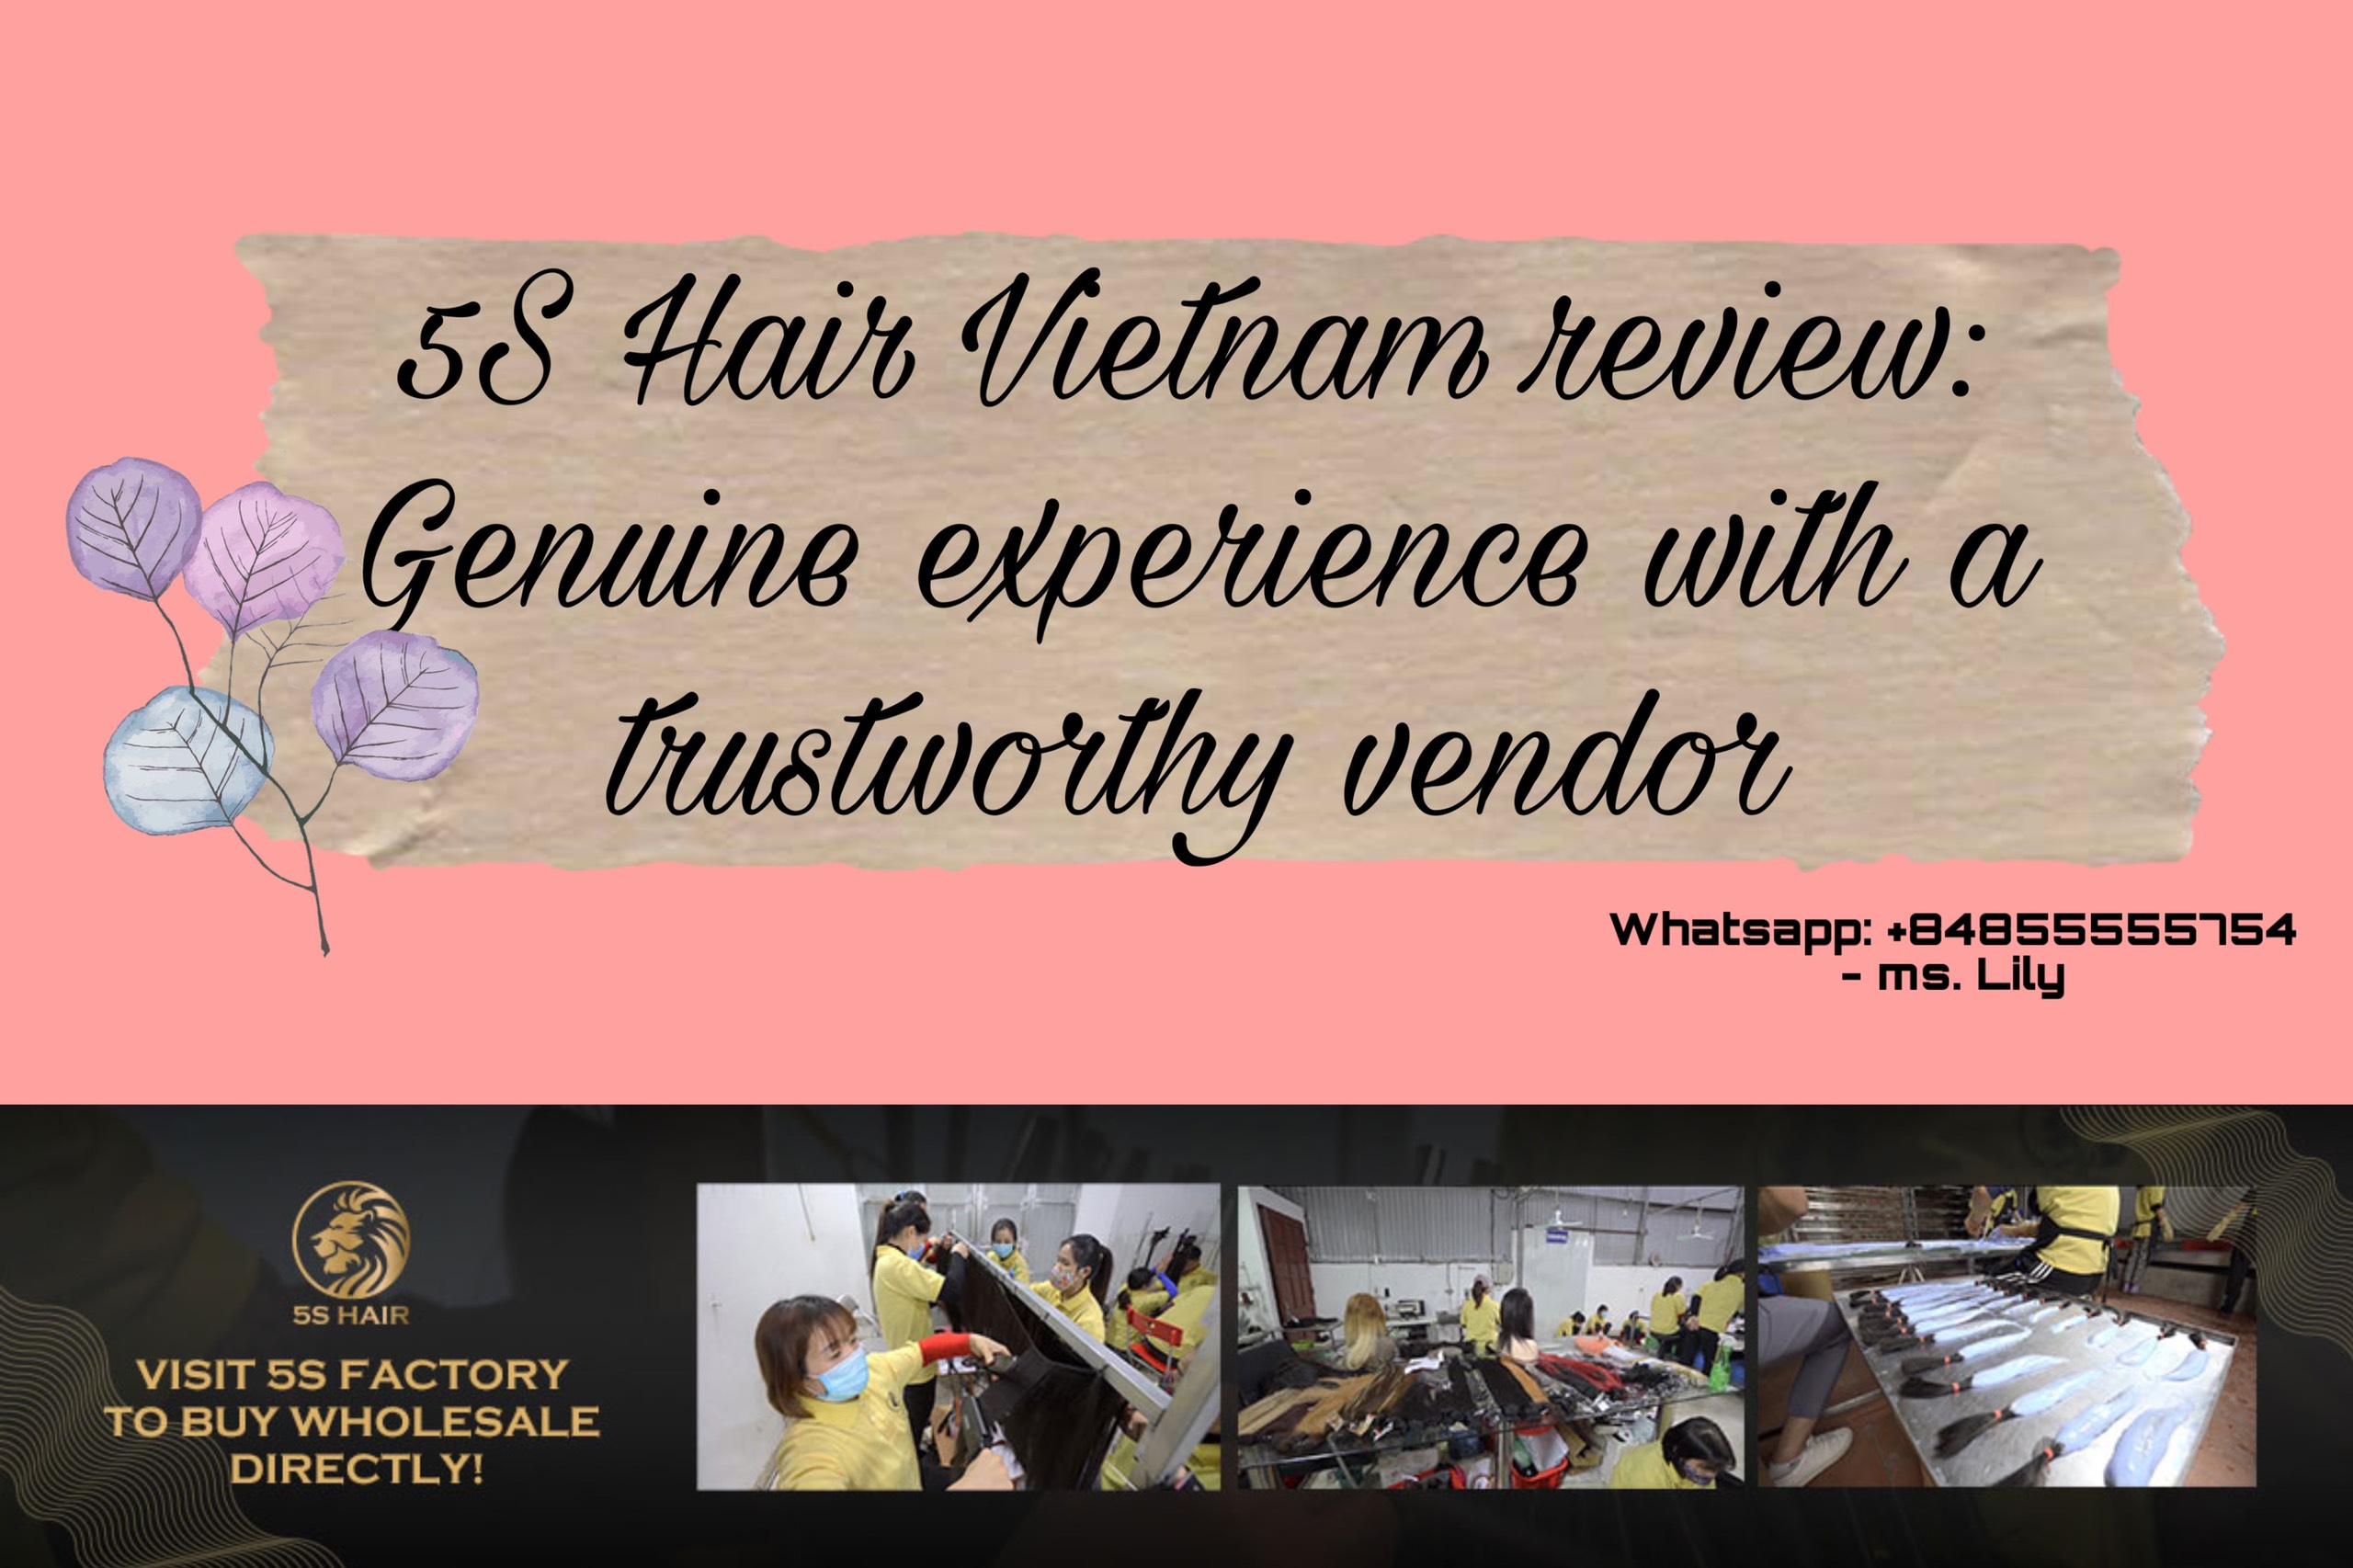 5s-hair-vietnam-review-genuine-experience-with-a-trustworthy-vendor-20